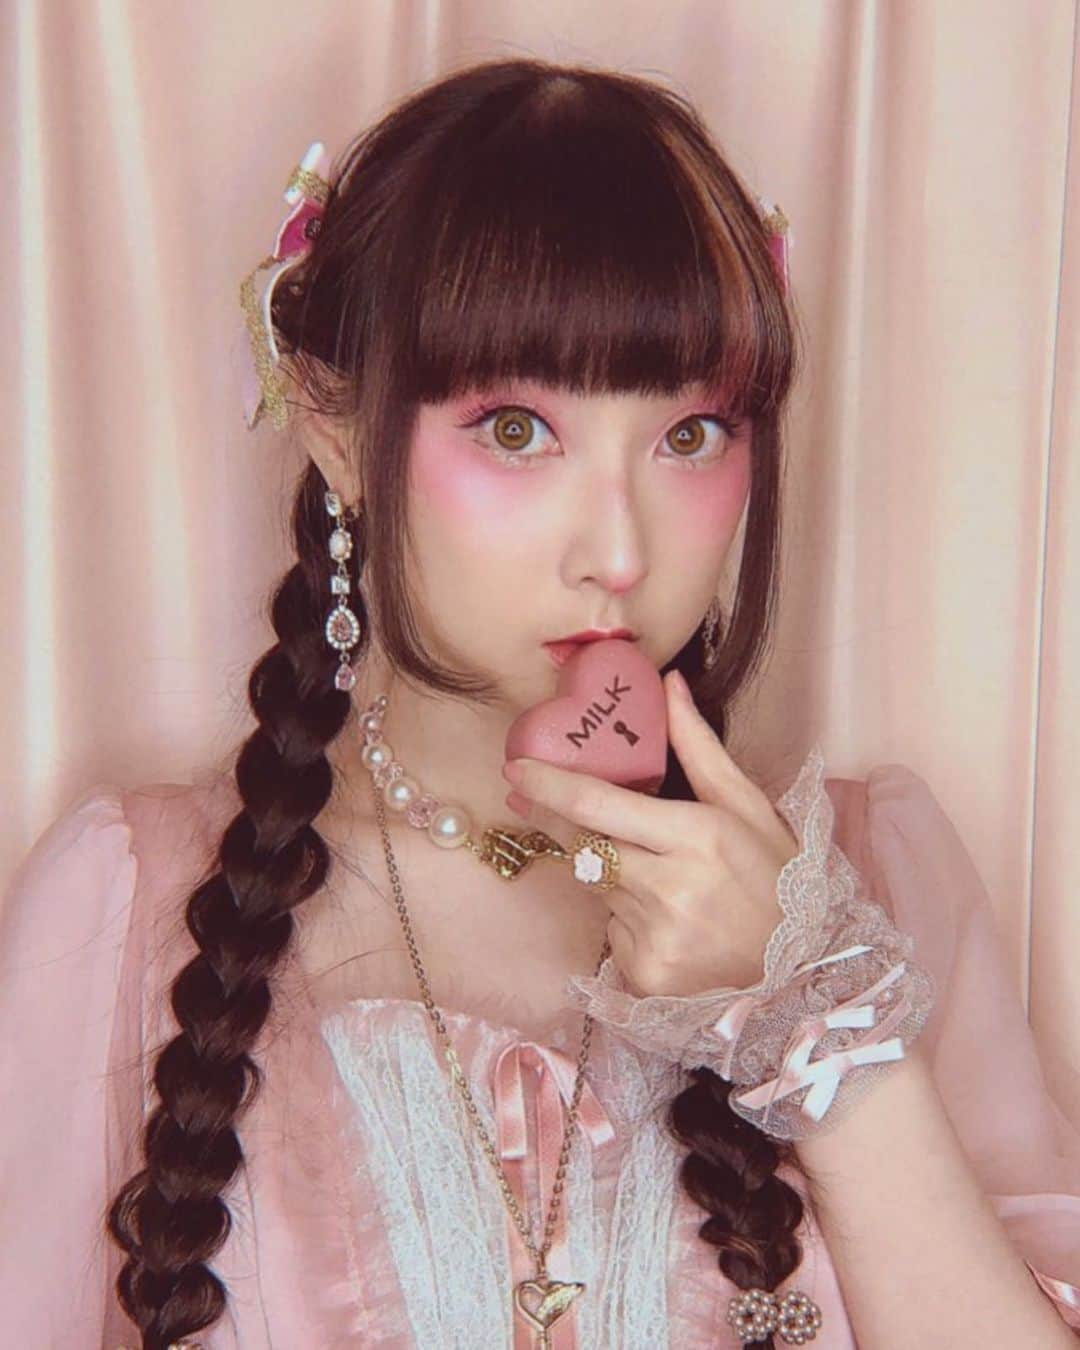 RinRinさんのインスタグラム写真 - (RinRinInstagram)「Happy Valentine’s Day💘 What did you do today? I had some work meetings but spent the rest of the day talking and playing games with family and friends online🥰  ハッピーバレンタインデー💘 今日何したの〜？ あたし仕事が少しあったけど、残りの時間にお母さんと友達と電話したり、オンラインゲームしたりしてた🥰 . . #vdayootd Dress: #angelicpretty Key necklace & chocolate: #milkharajuku Hairties: #parcasilky Earrings: #mocatokyo  Flower donuts: #gmgm  . Thank you @milk__official_ for the "Magic Key & Heart Chocolate" Valentine’s Day present! Such a wonderful gift of chocolate and a key necklace🥺💕 @milk__official_ さんから"Magic Key & Heart Chocolate"のバレンタインプレゼントありがとうございました！すごく豪華なチョコと鍵のネクレス🥺💕すごく気にってます💘 . #rinrindoll #japan #tokyo #harajuku #japanesefashion #tokyofashion #harajukufashion #東京 #コーデ #今日のコーデ #lolitafashion #ロリータ #ロリィタ #バレンタイン #バレンタインコーデ #バレンタインメイク #vdaymakeup #valentinesday」2月15日 3時21分 - rinrindoll